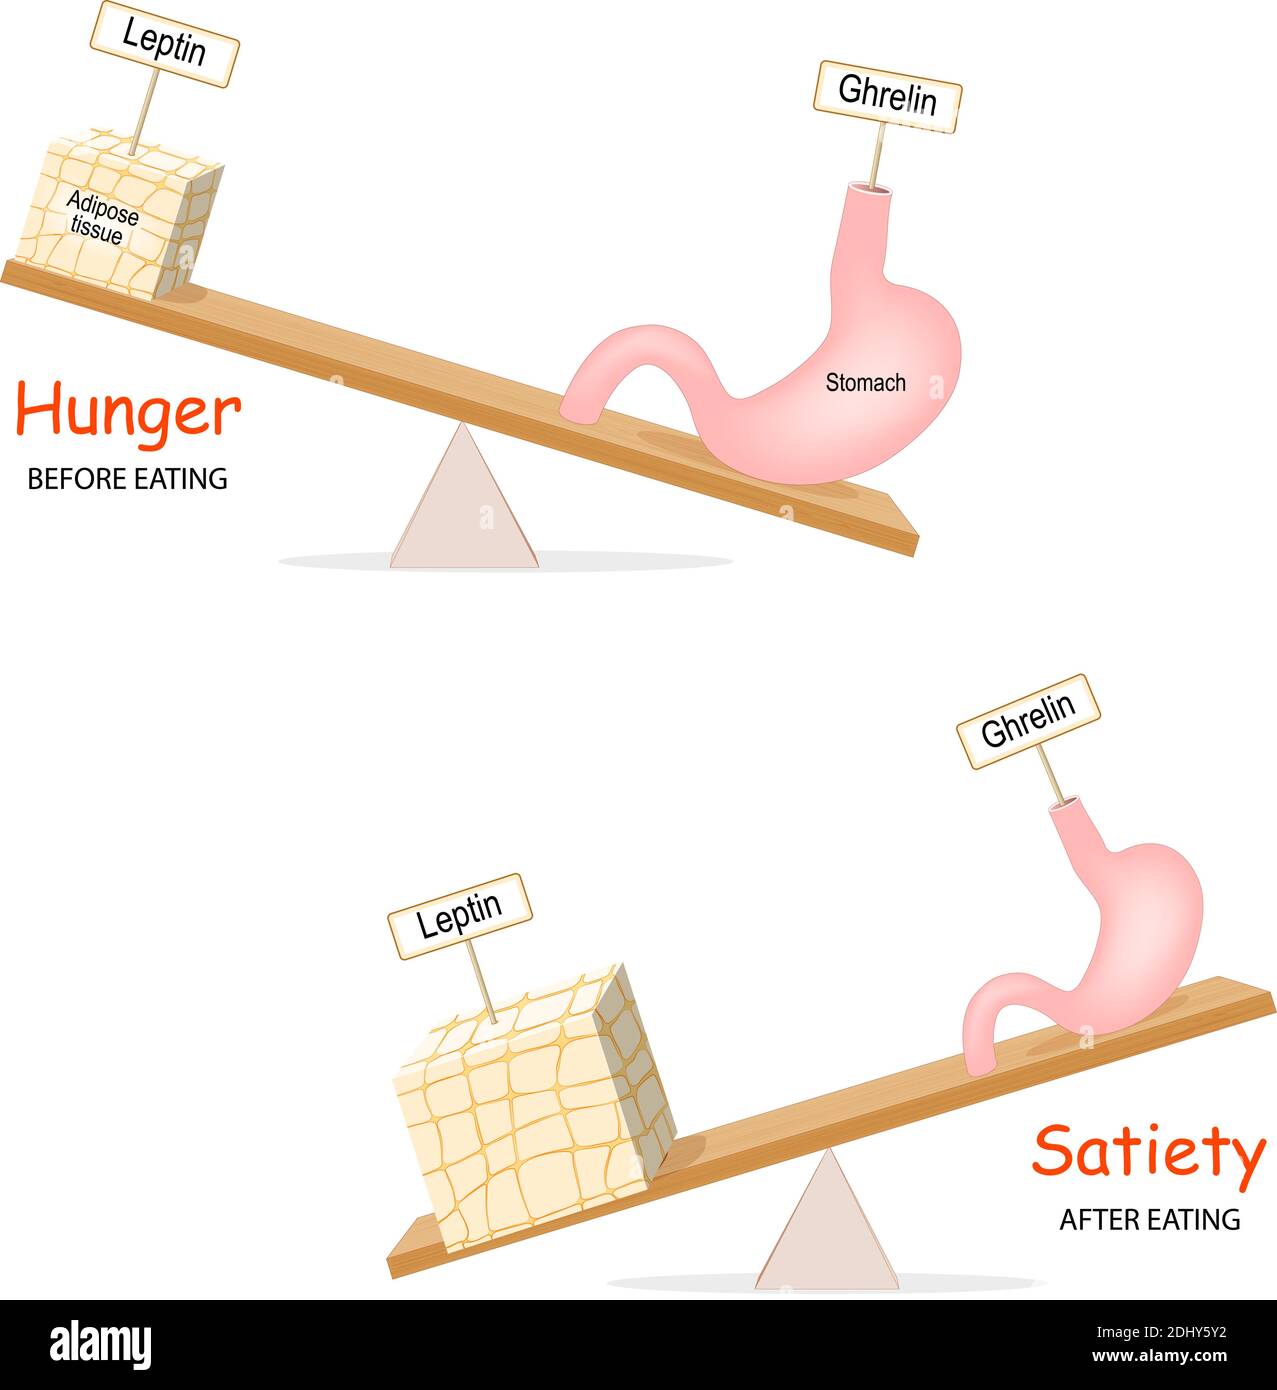 Ghrelin and Leptin. Human hormones before and after eating. Balance hormones that regulate Hunger and Satiety. Stock Vector